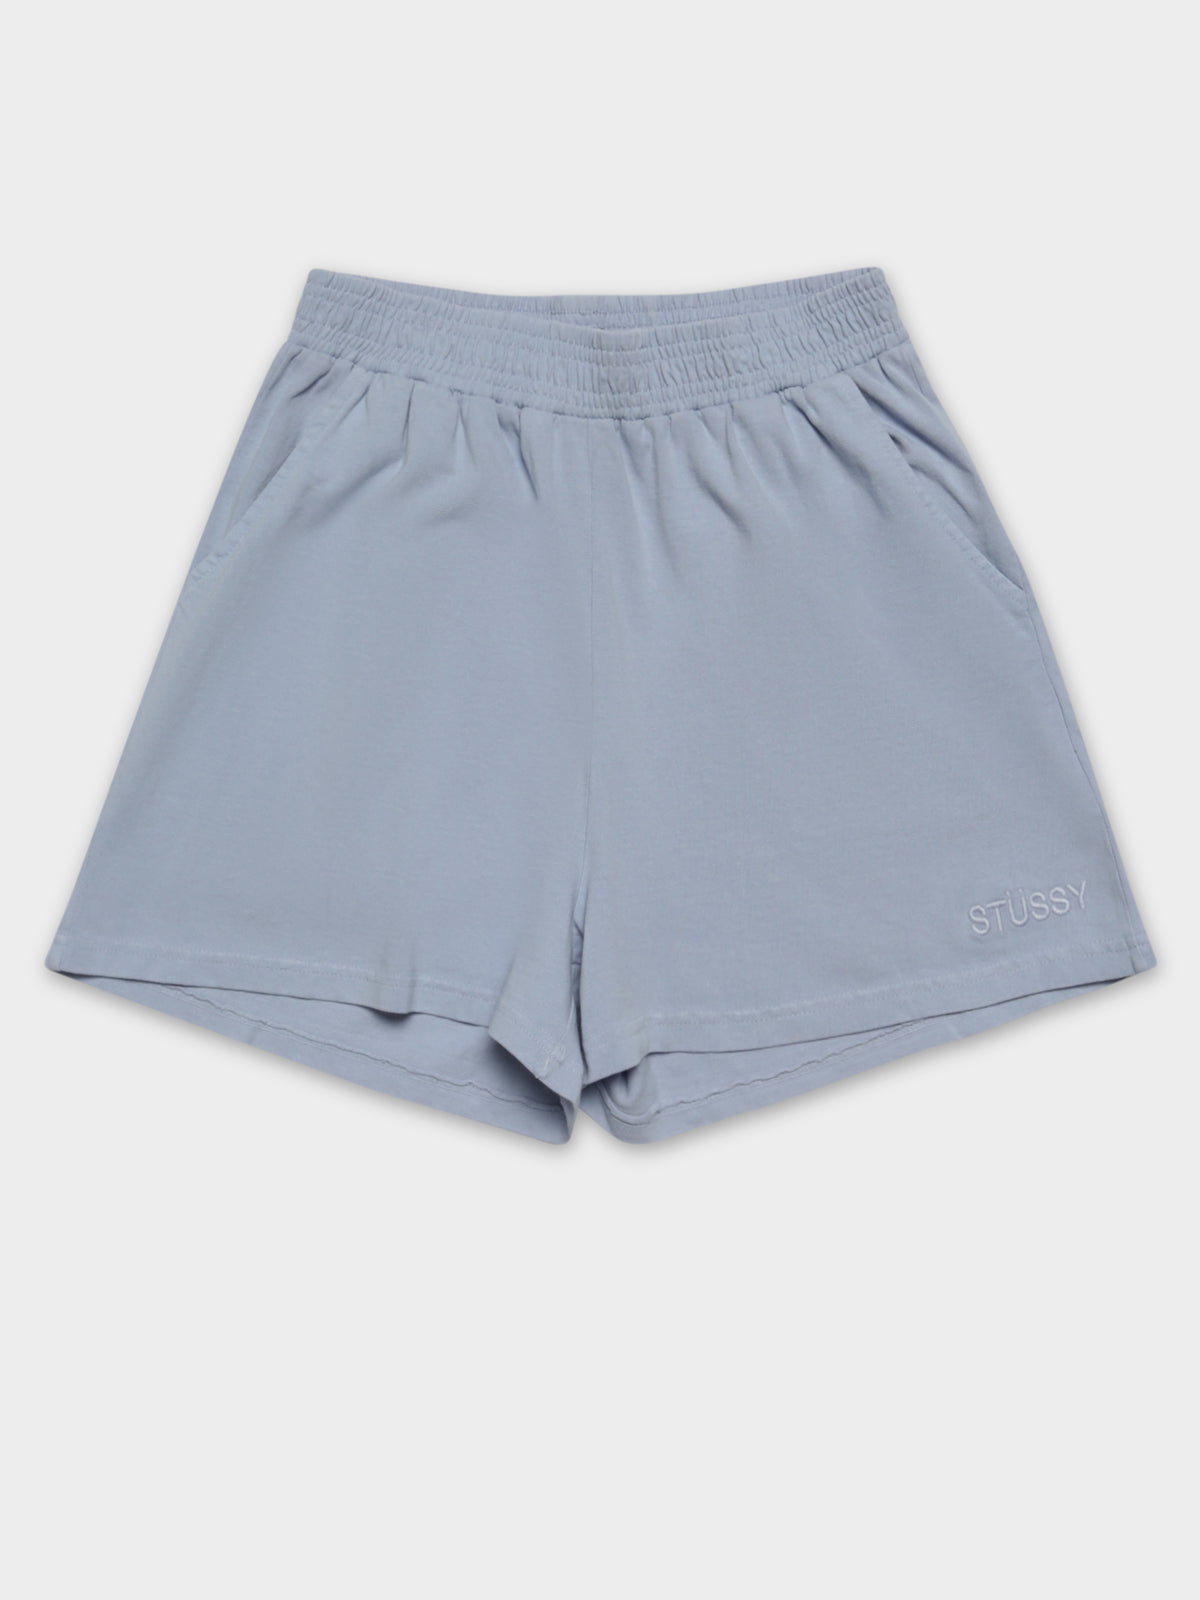 Trail Rugby Shorts in Pale Blue